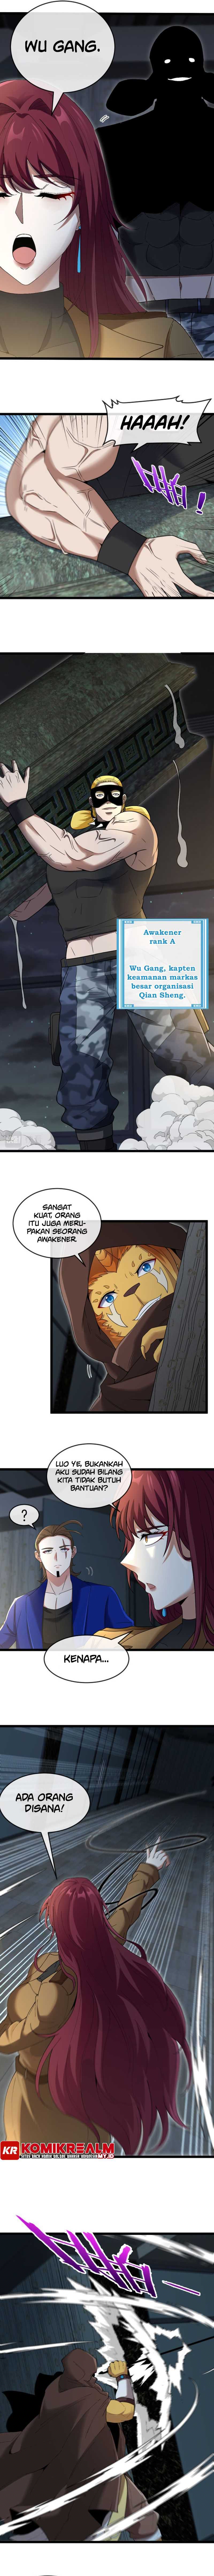 The Golden Lion King  Chapter 07 3